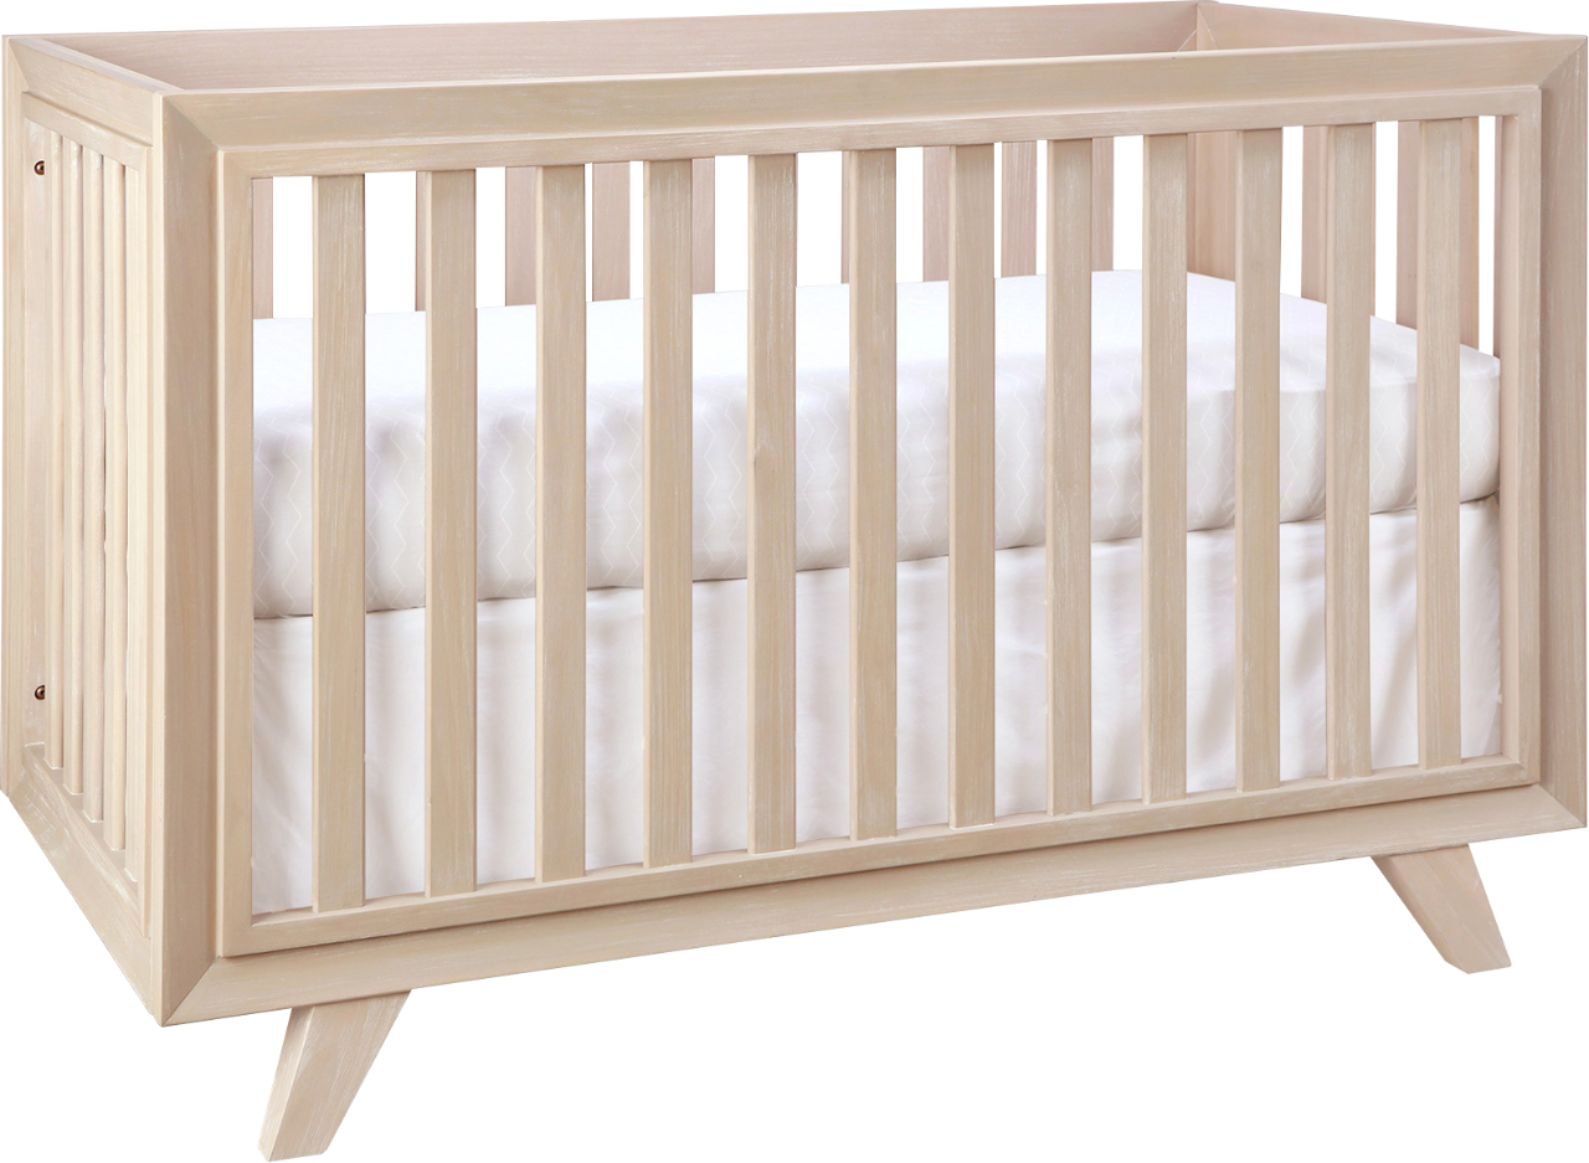 Angle View: Second Story Home Wooster 3-in-1 Convertible Crib, Almond